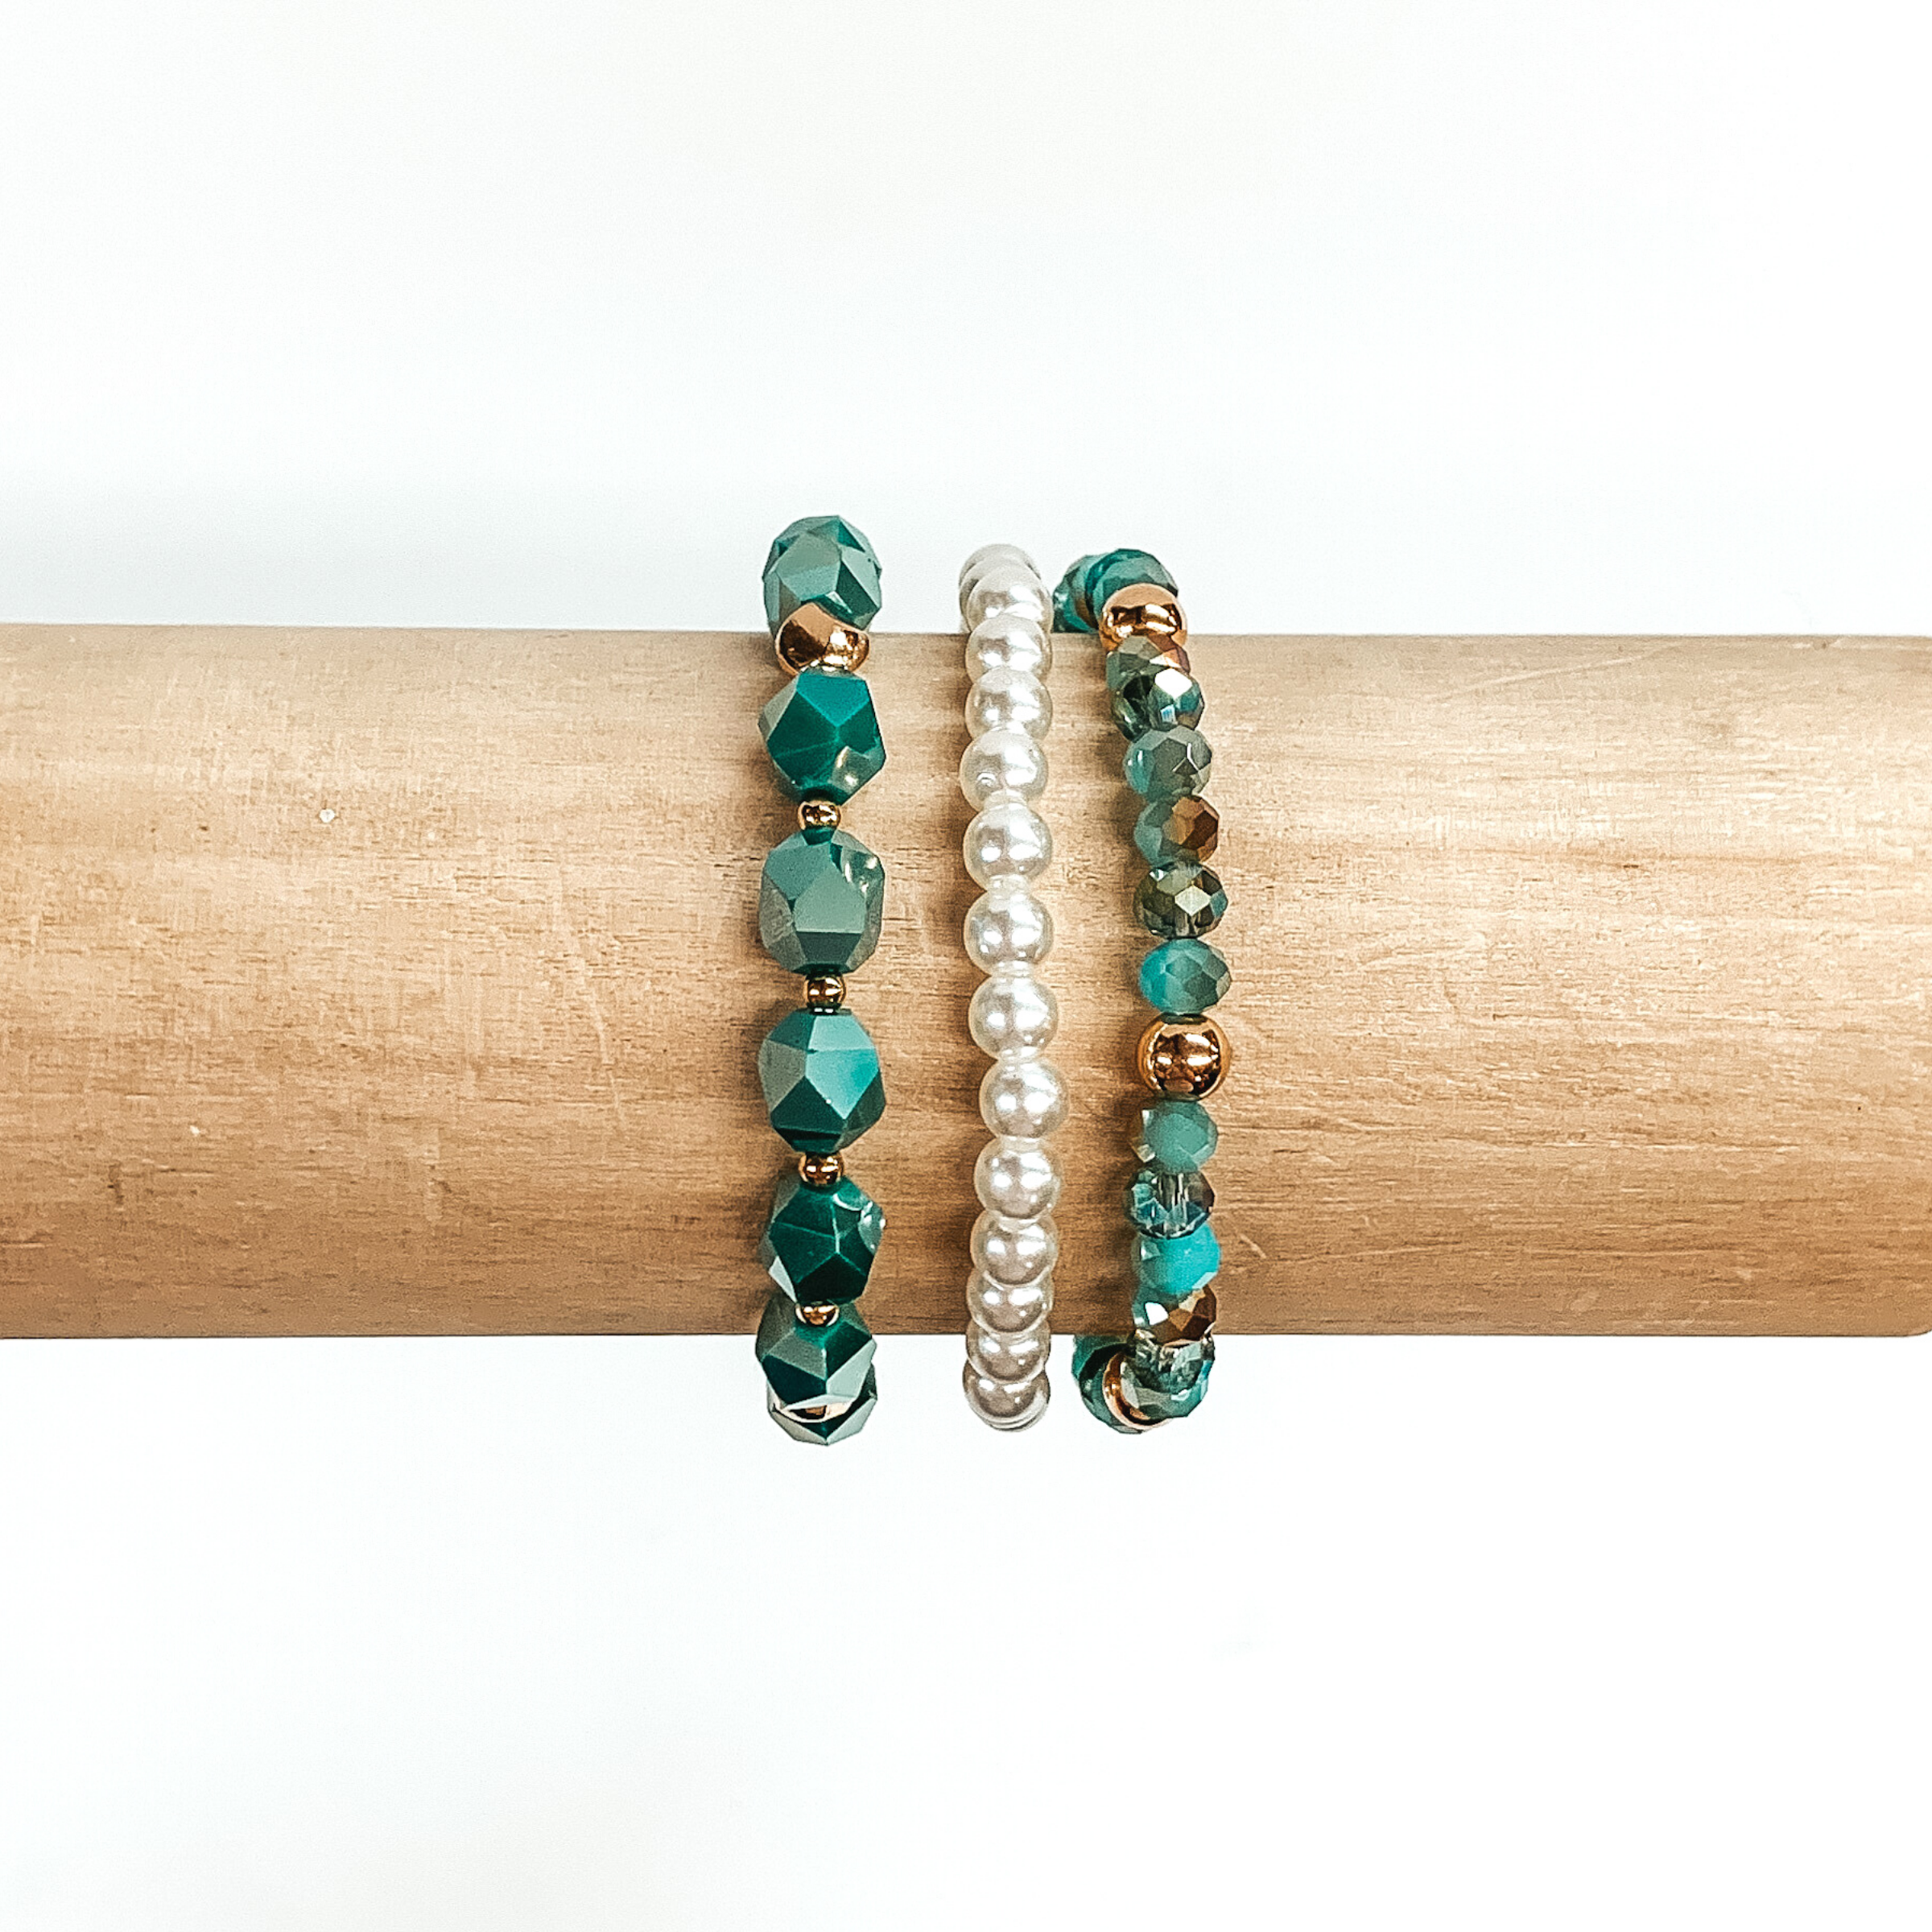 Beaded bracelet set with three different bracelets. One bracelet is white pearl beads only. The next one has big teal crystal beads with gold spacers. The last braclet has a mixture of tan and teal crystal beads with gold spacers. These bracelets are pictured on a wood bracelet holder on a white background.